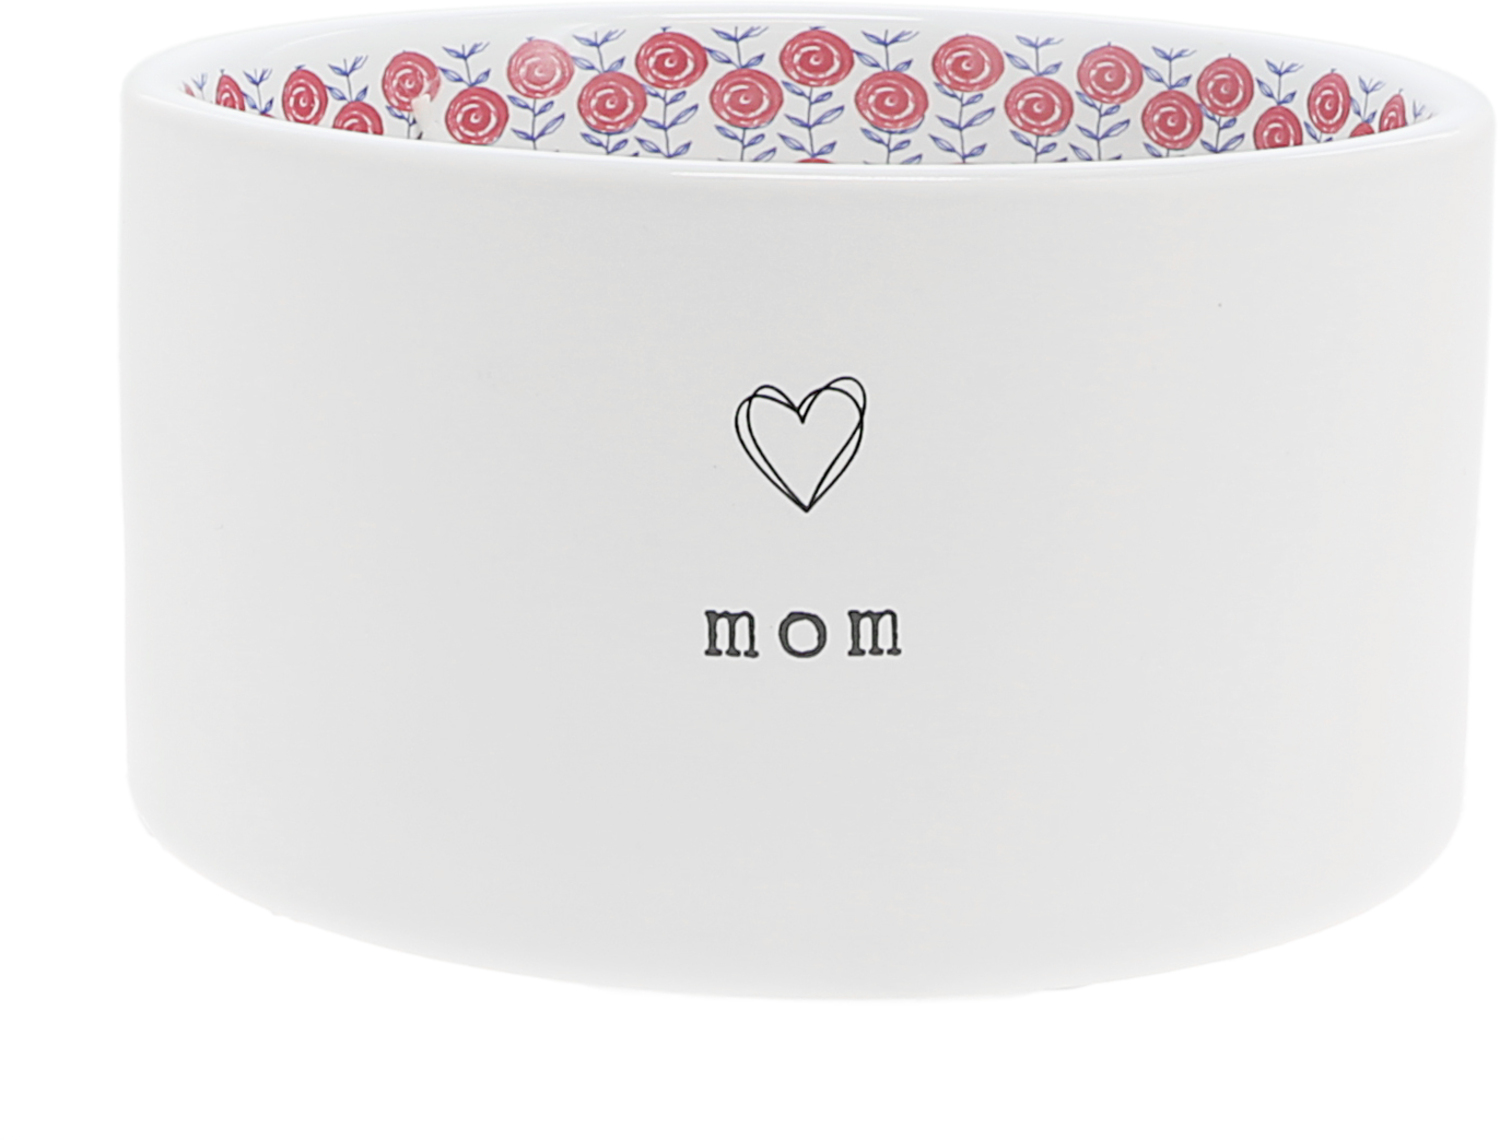 Mom by You Make Me Smile -ALW - Mom - 10 oz 100% Soy Wax Reveal, Triple Wick Candle Scent: Tranquility